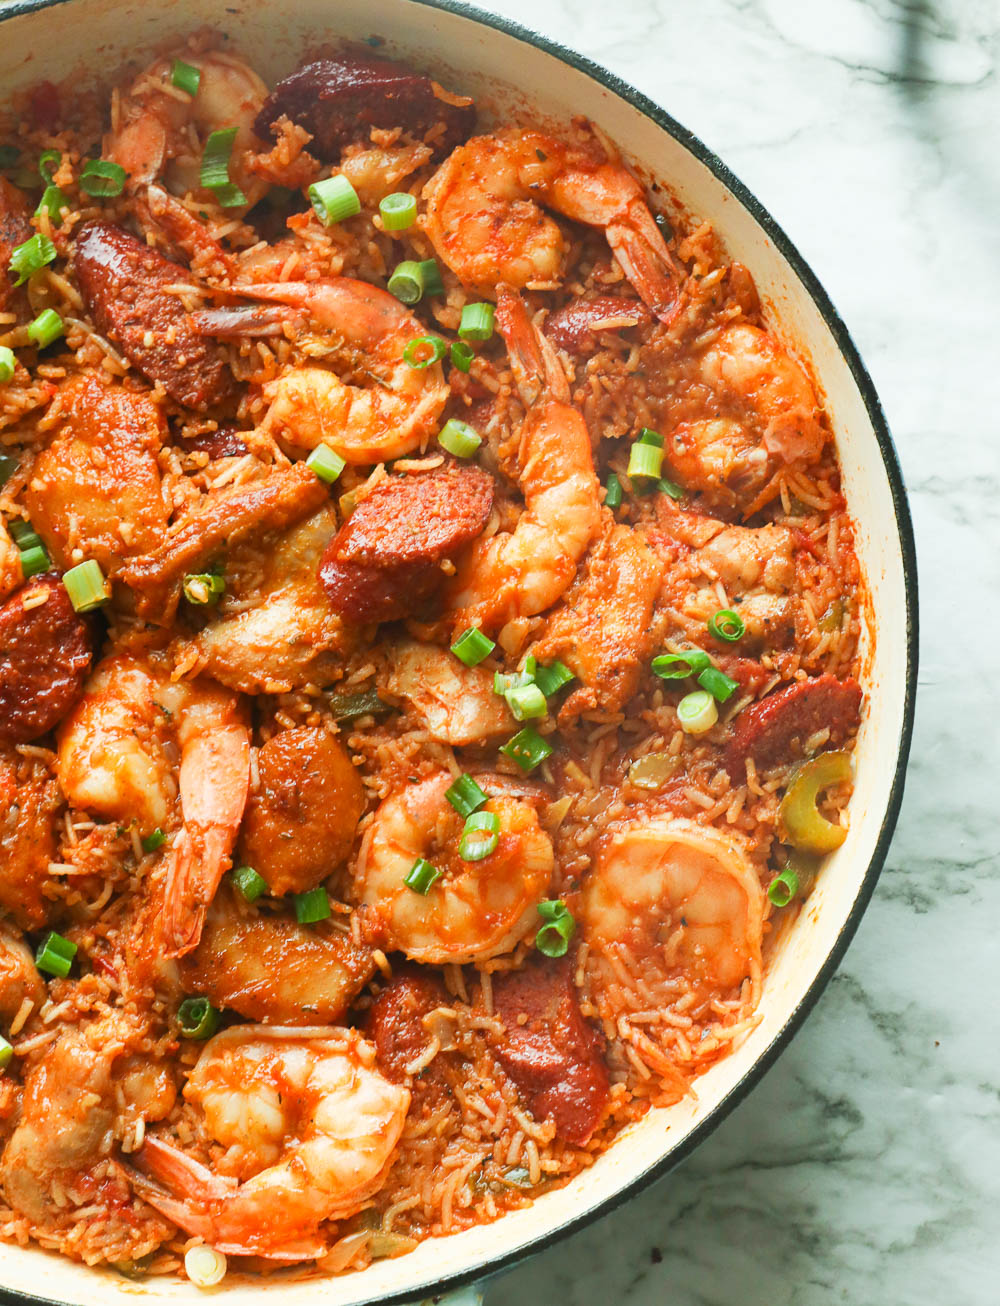 A pan of freshly cooked jambalaya with shrimp, sausages, and chicken.